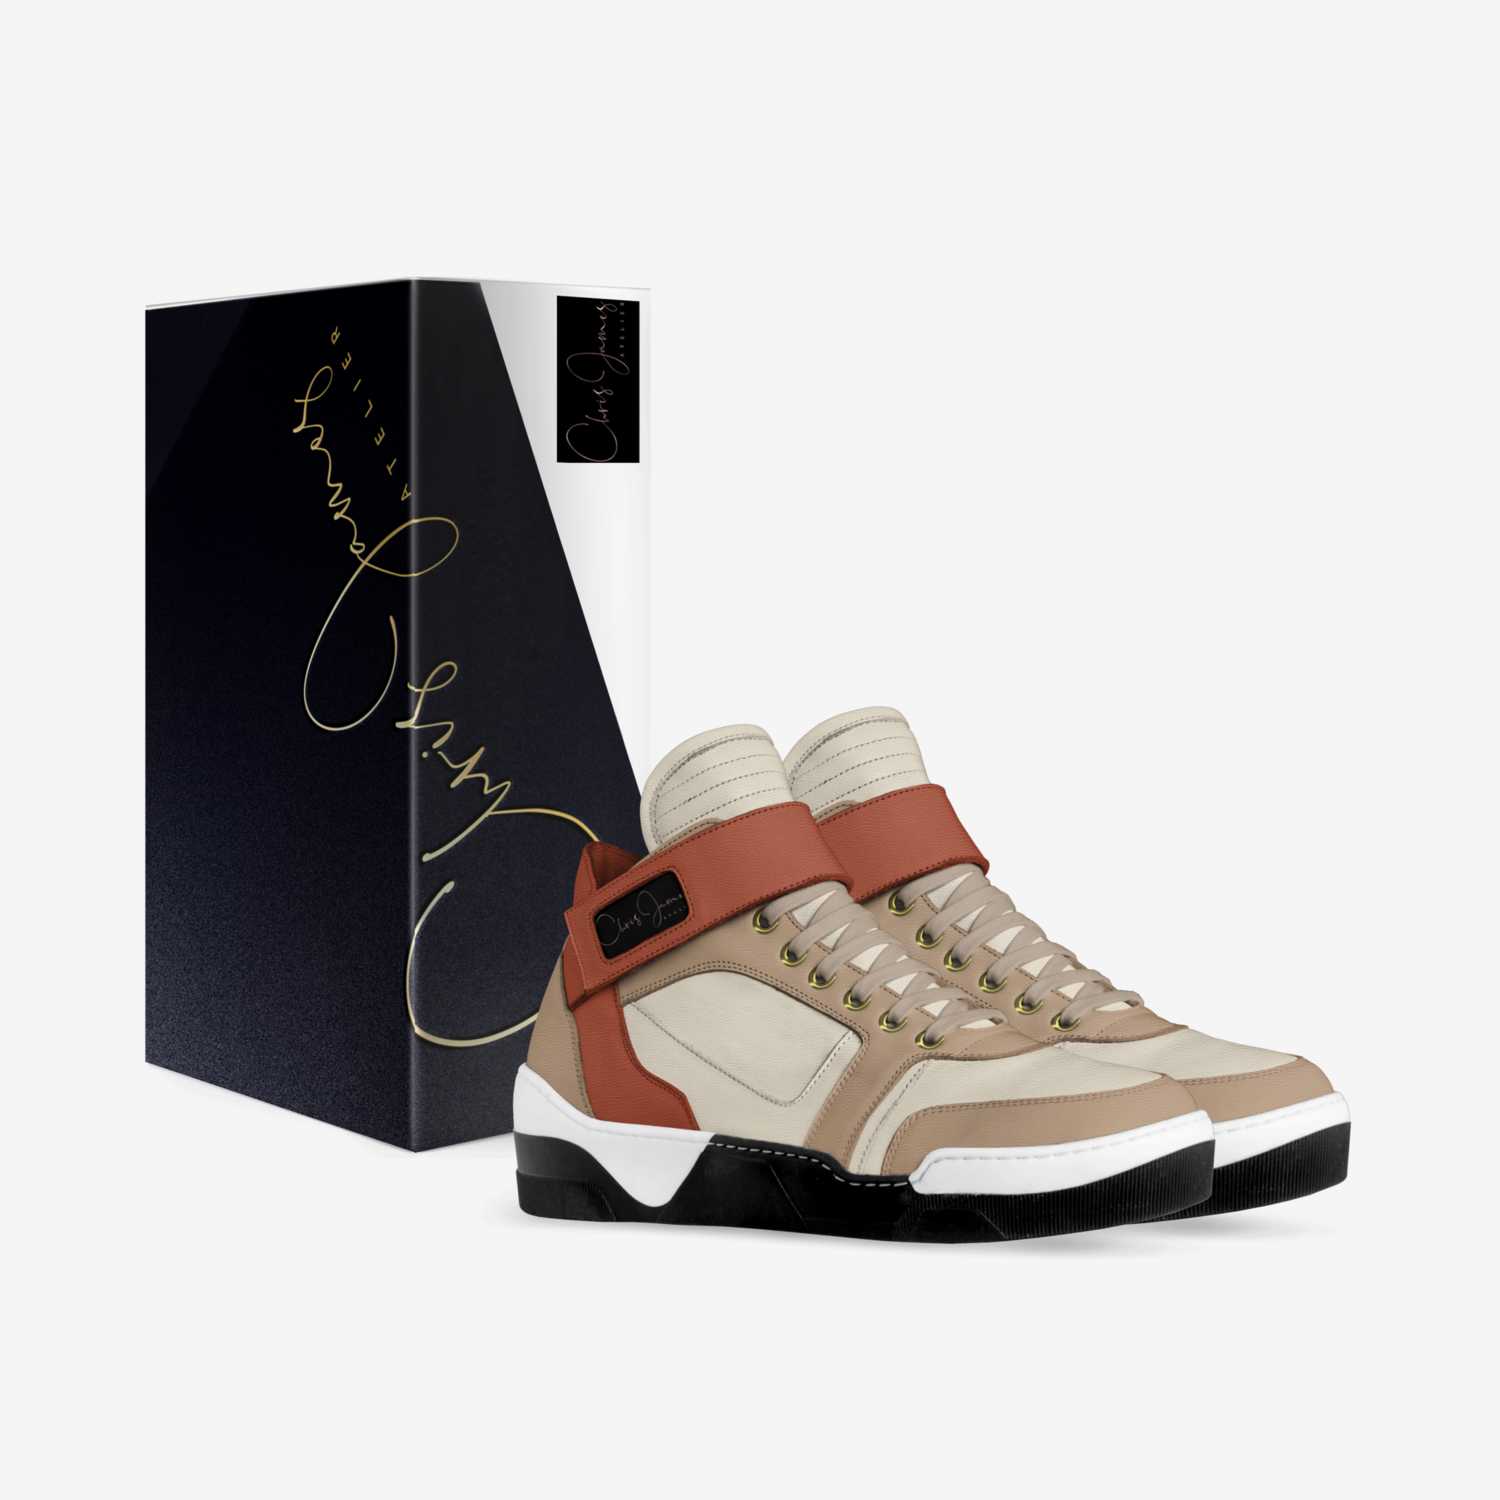 ChrisJamesAtelier custom made in Italy shoes by Christopher James Pistorio | Box view